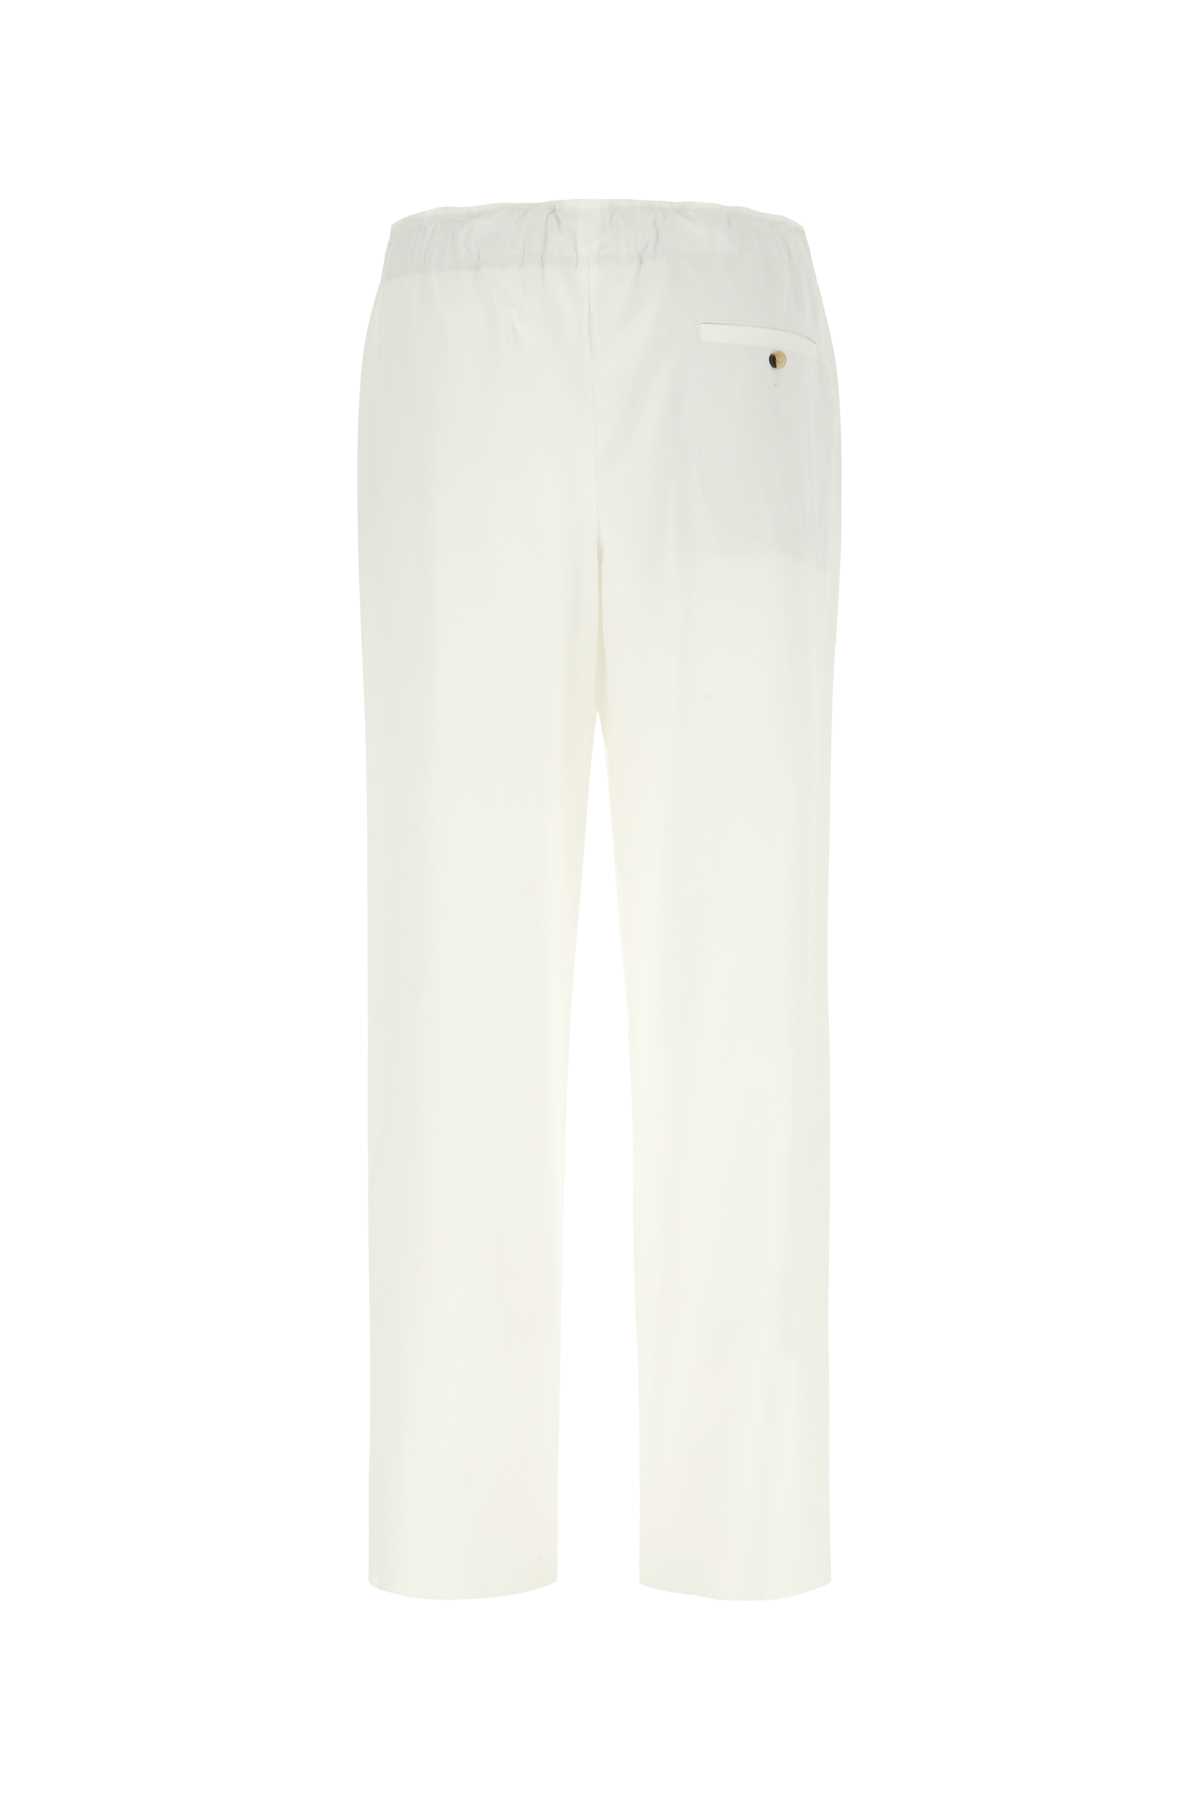 Agnona Ivory Cotton Blend Palazzo Trouser In N02